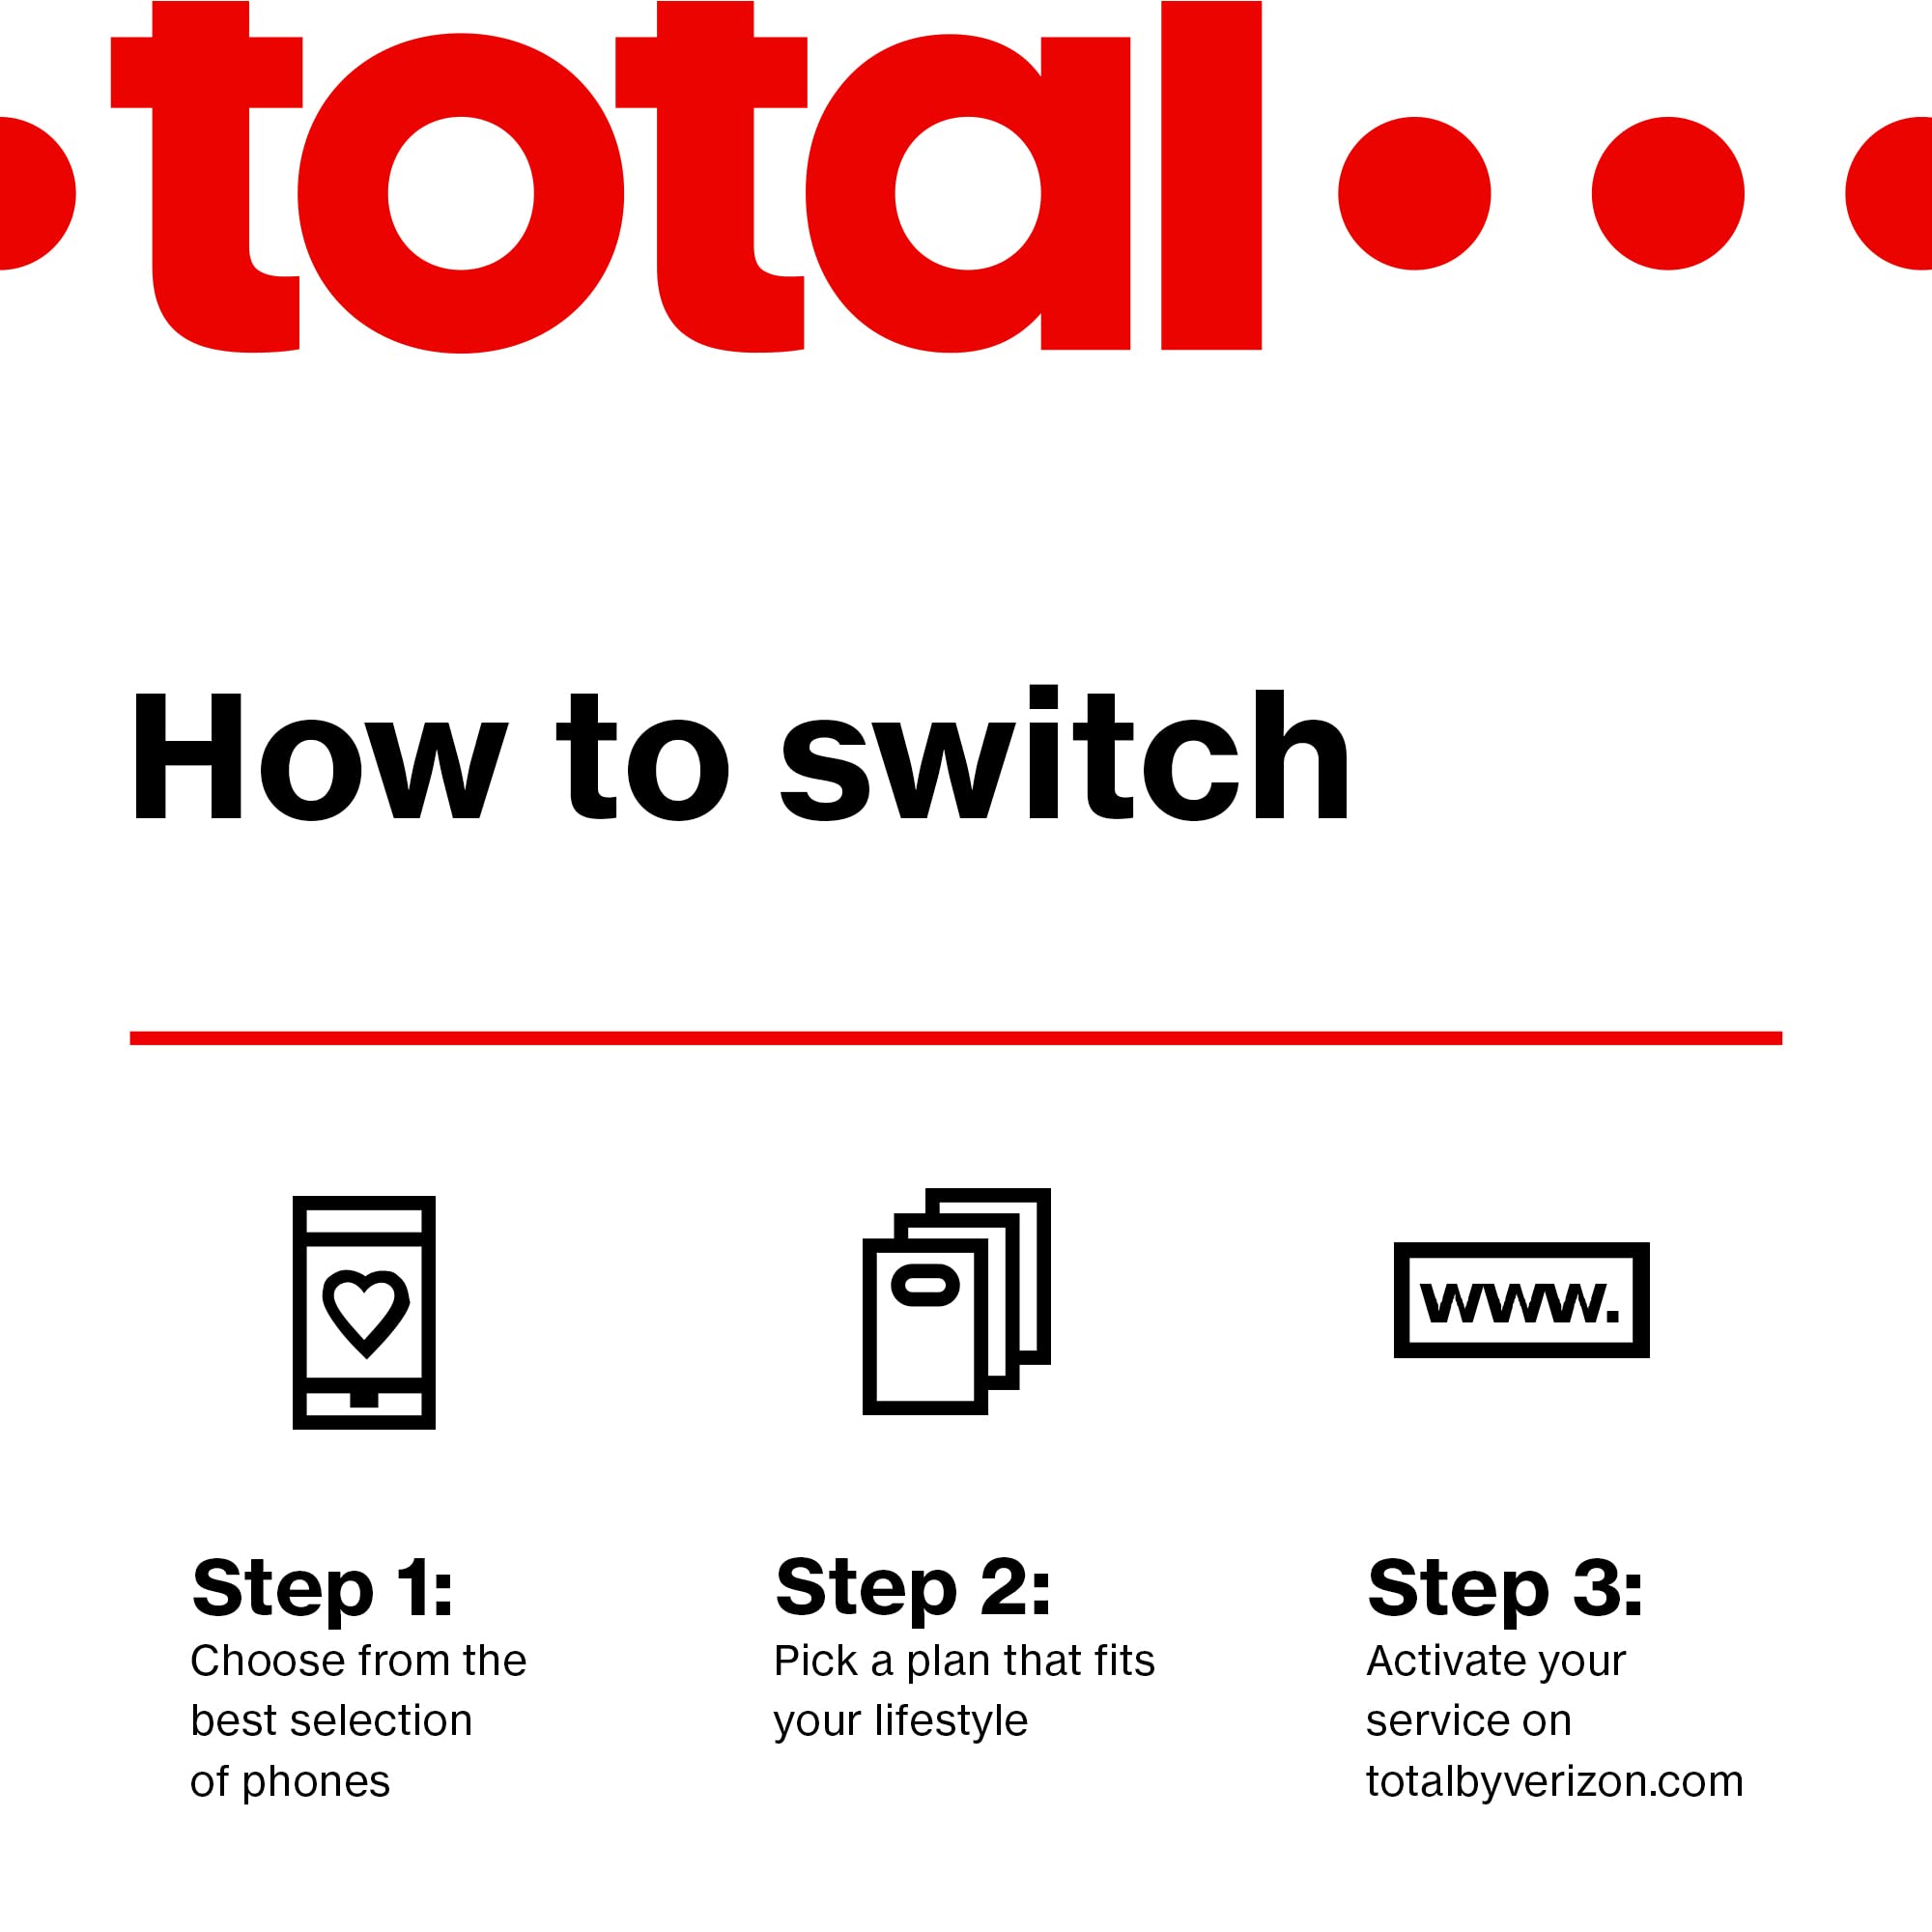 Total by Verizon $50 - Unlimited Talk and Text, 5G Data and HS/Monthly